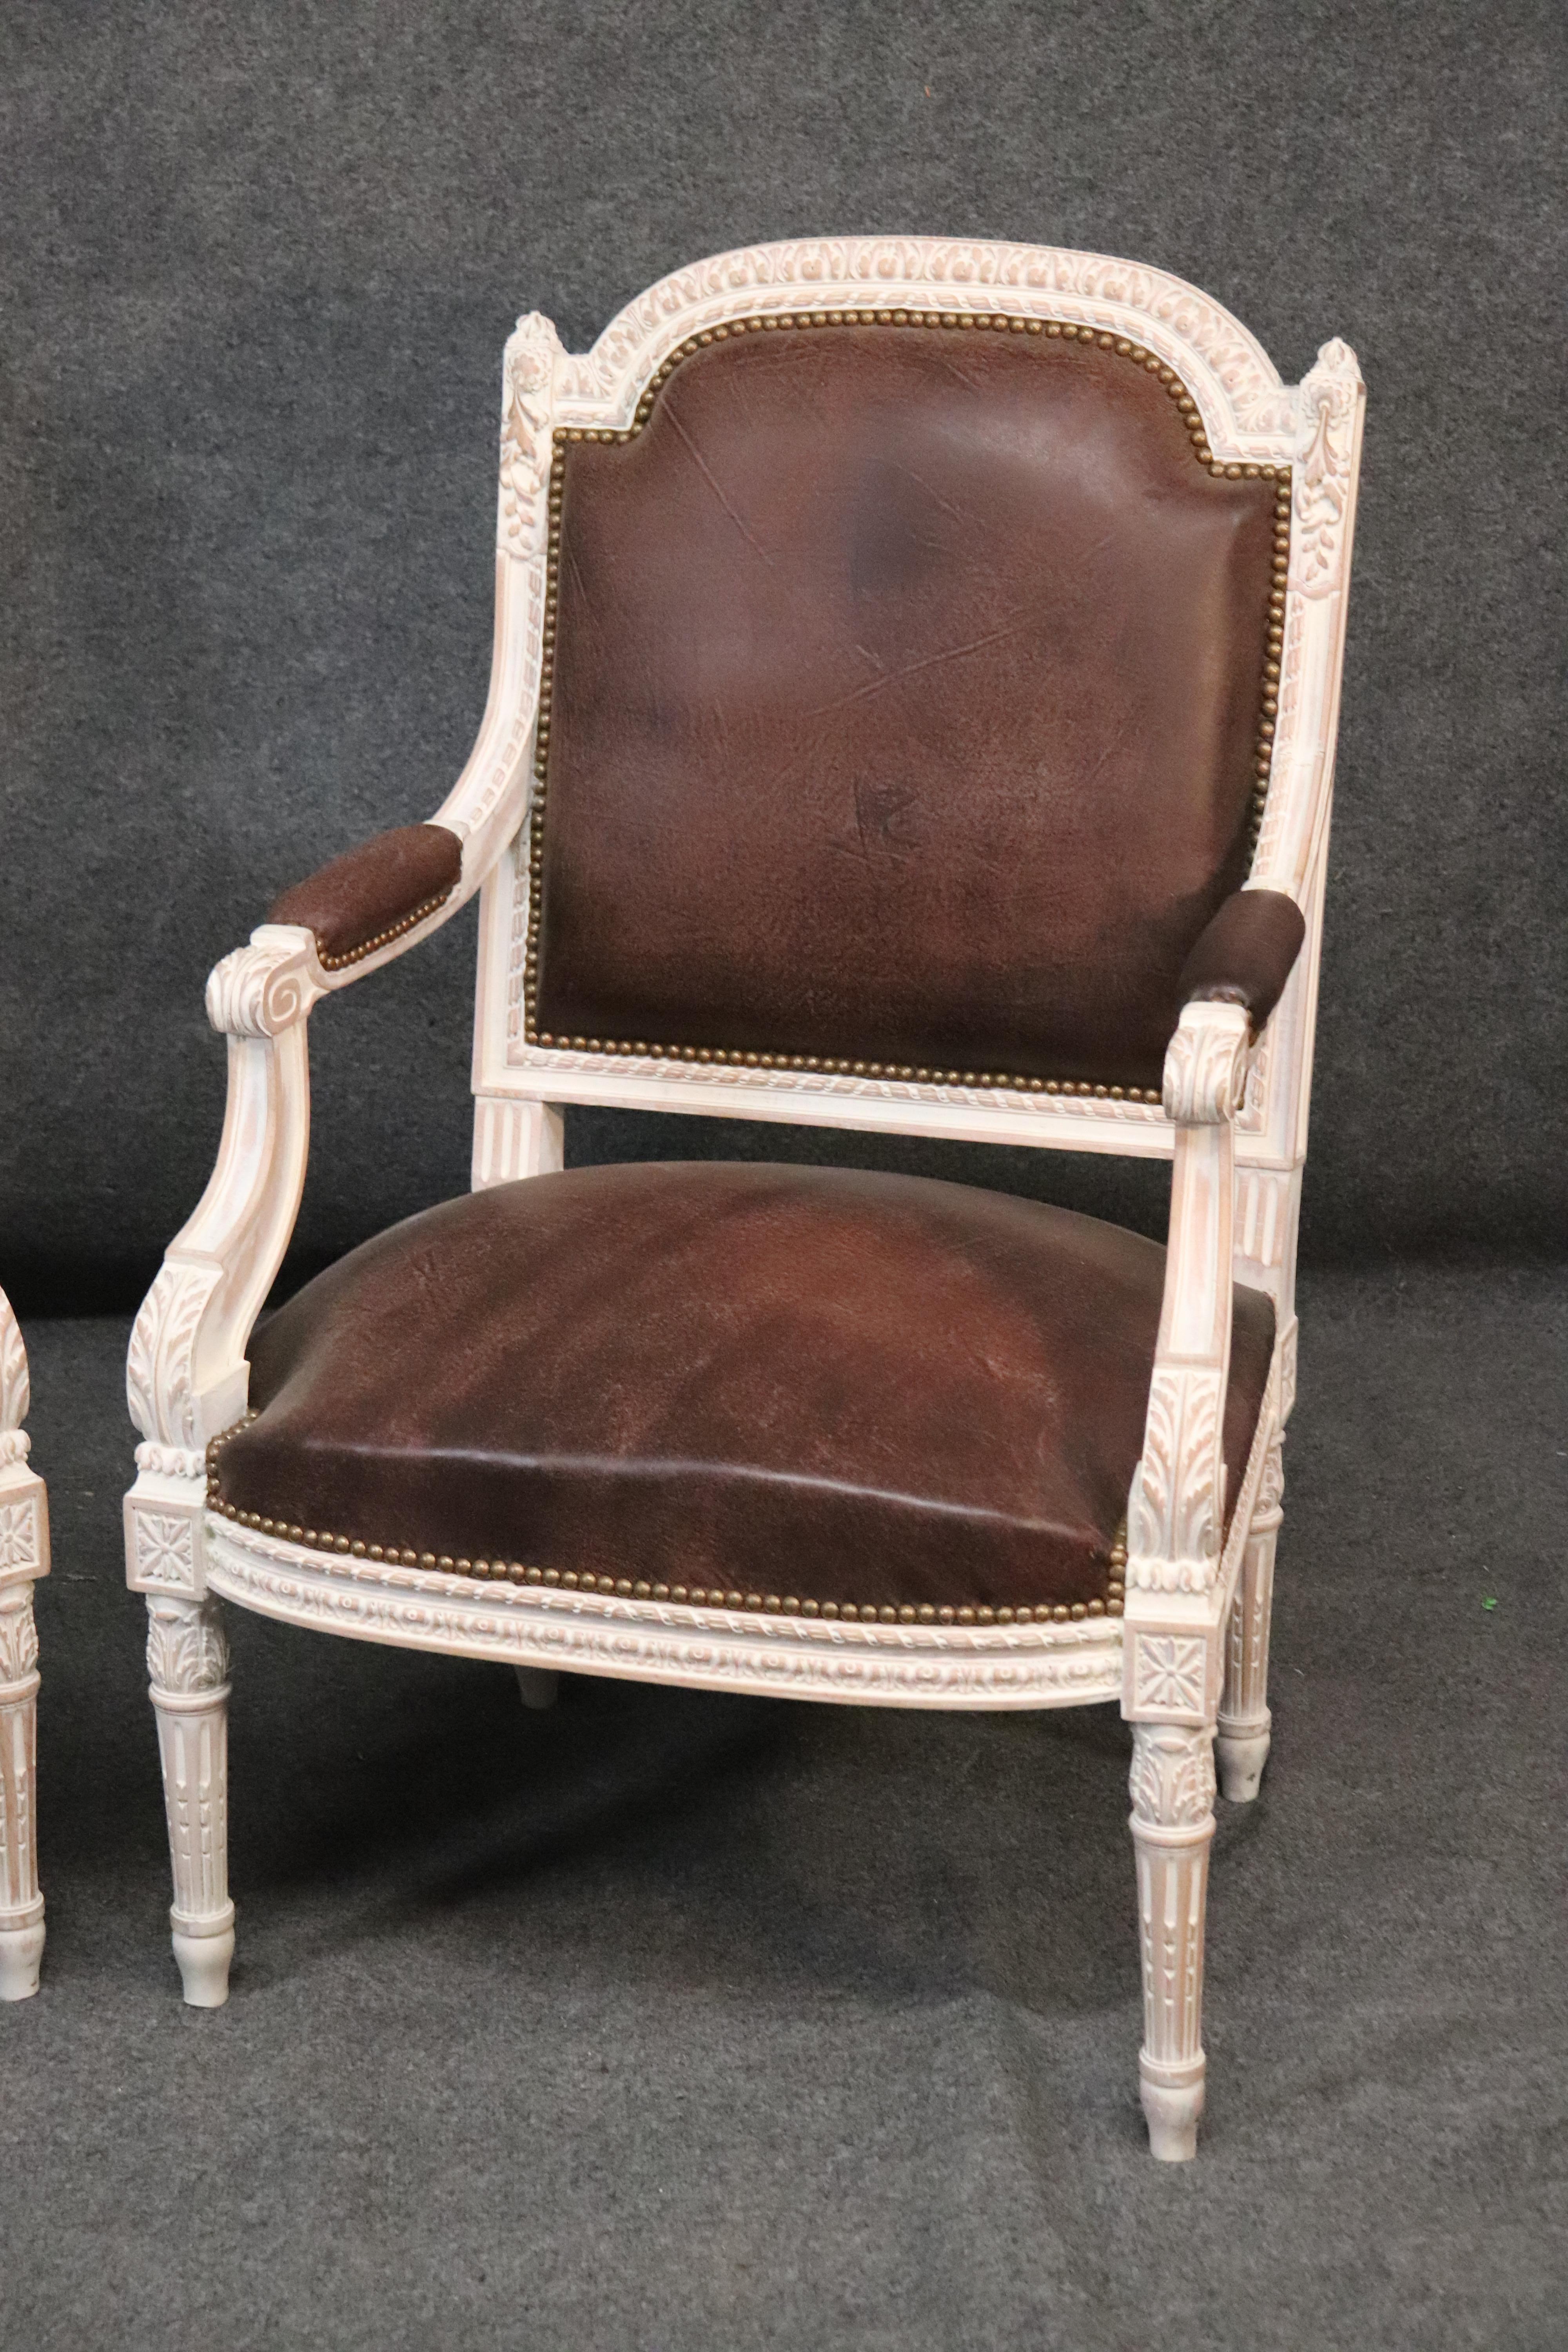 This is a fine pair of genuine chocolate brown natural top-grain leather arm chairs in the Louis XVI style the chairs are in excellent condition and have no damage or issues. They each measure 40 inches tall x 26 wide x 25 deep and the seat height